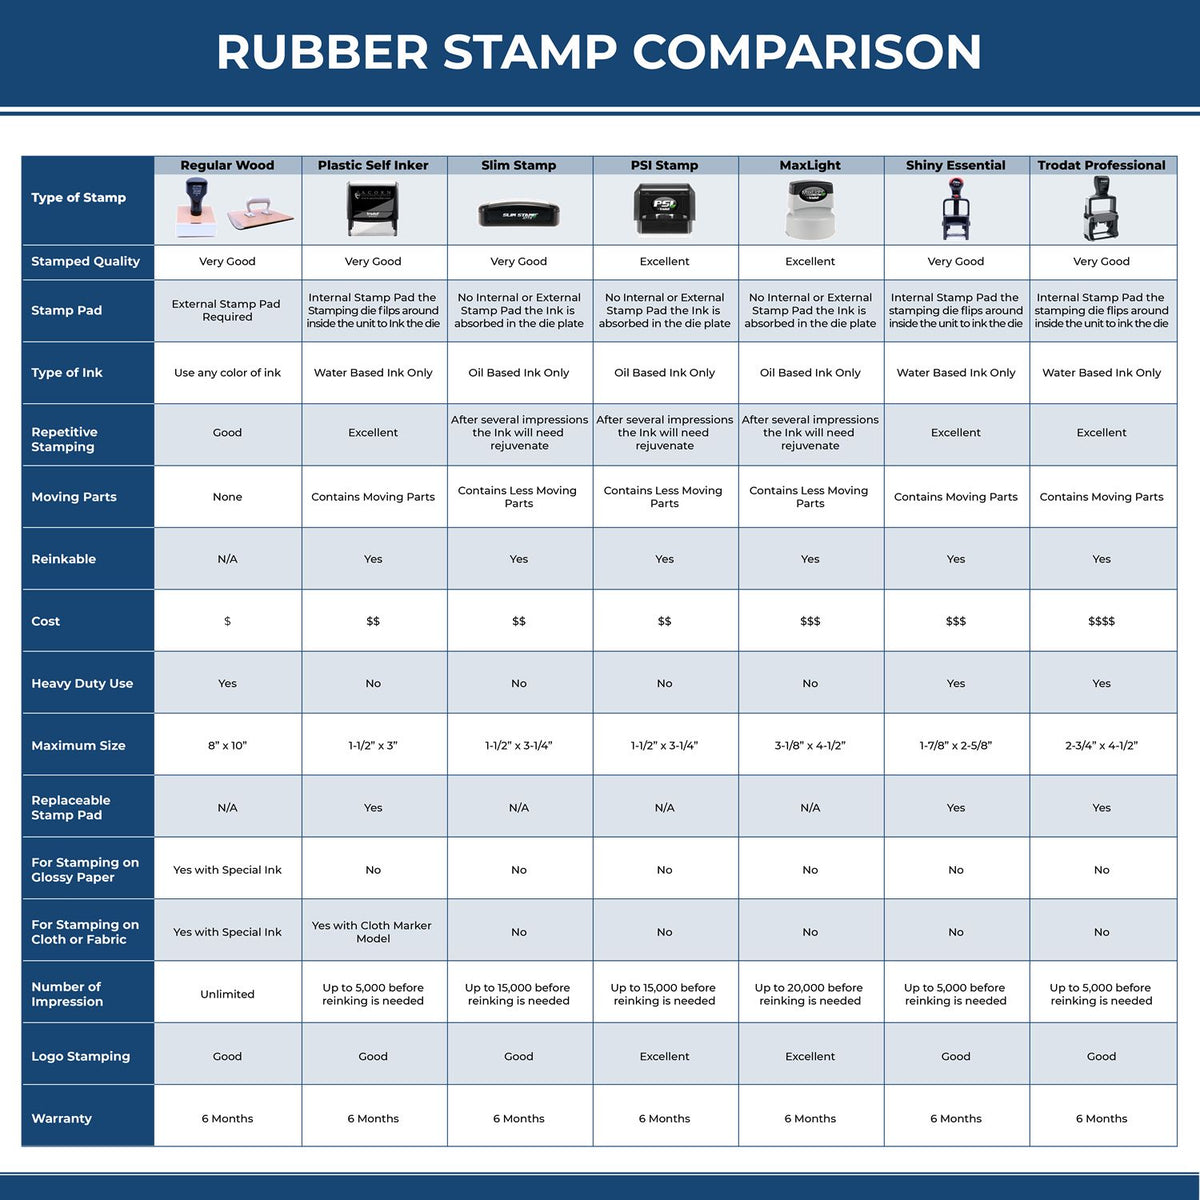 Large Faxed with Machine Rubber Stamp 5649R Rubber Stamp Comparison